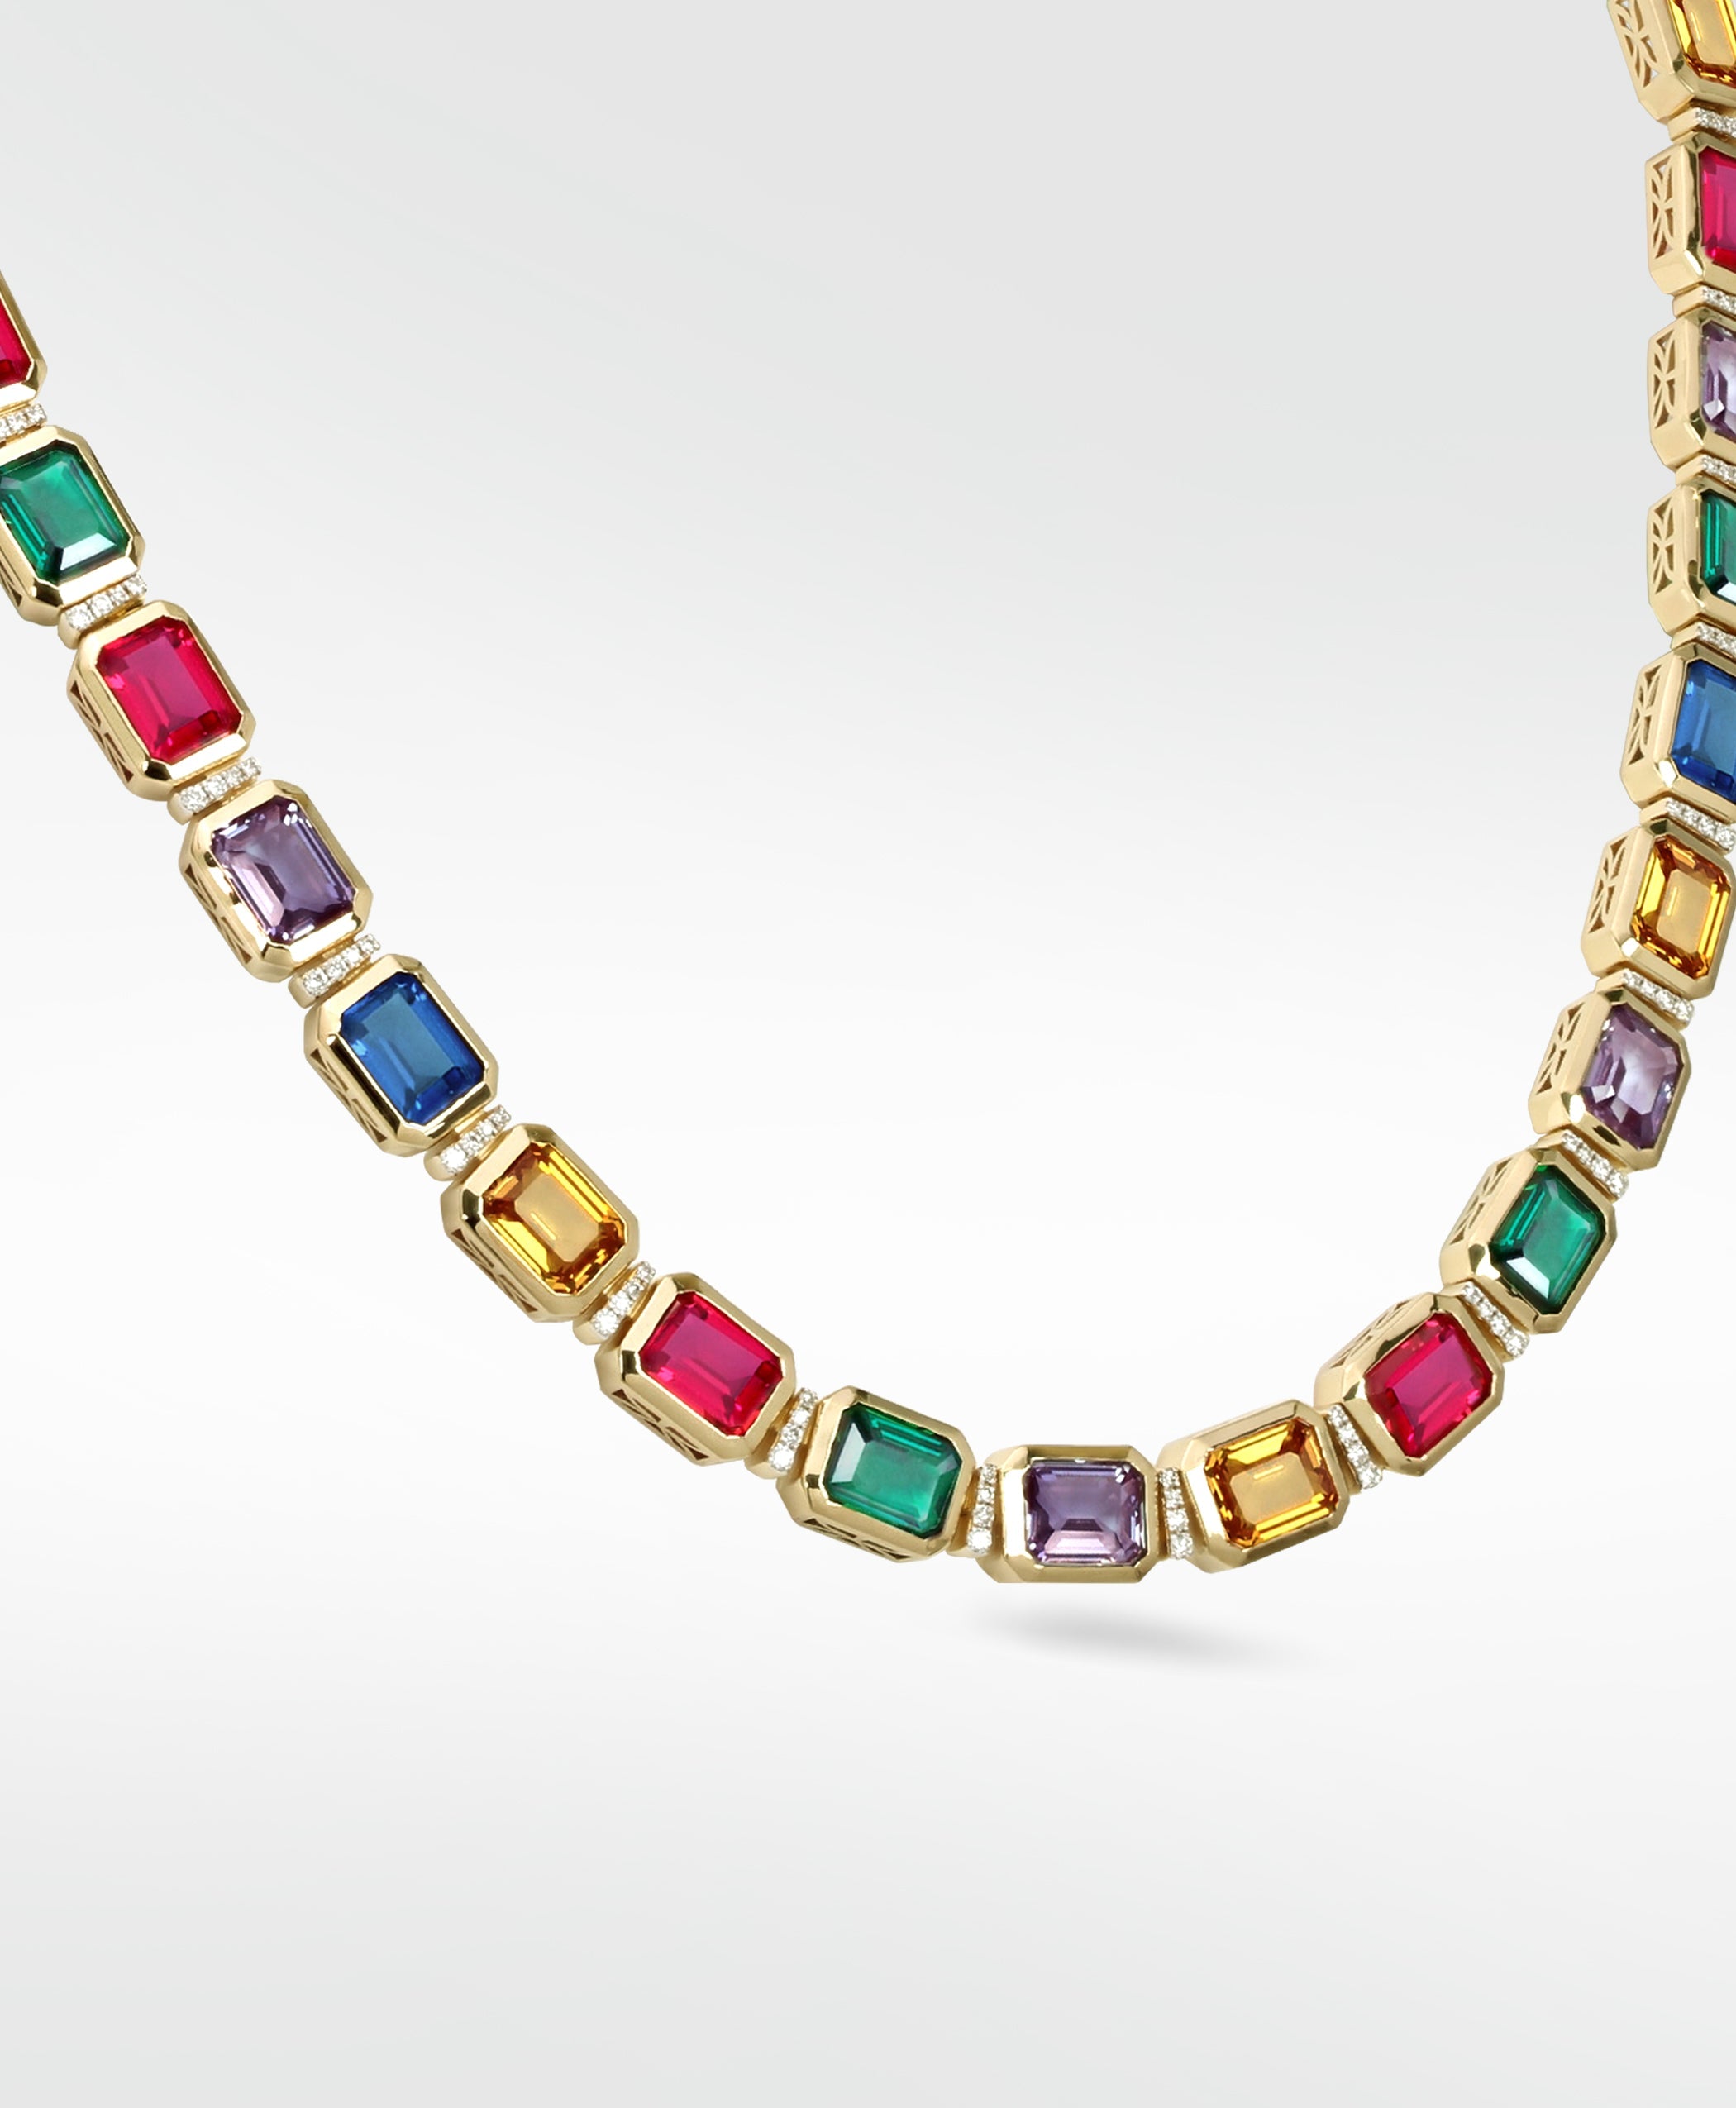 Nexus Sapphire, Emerald and Ruby Full Necklace